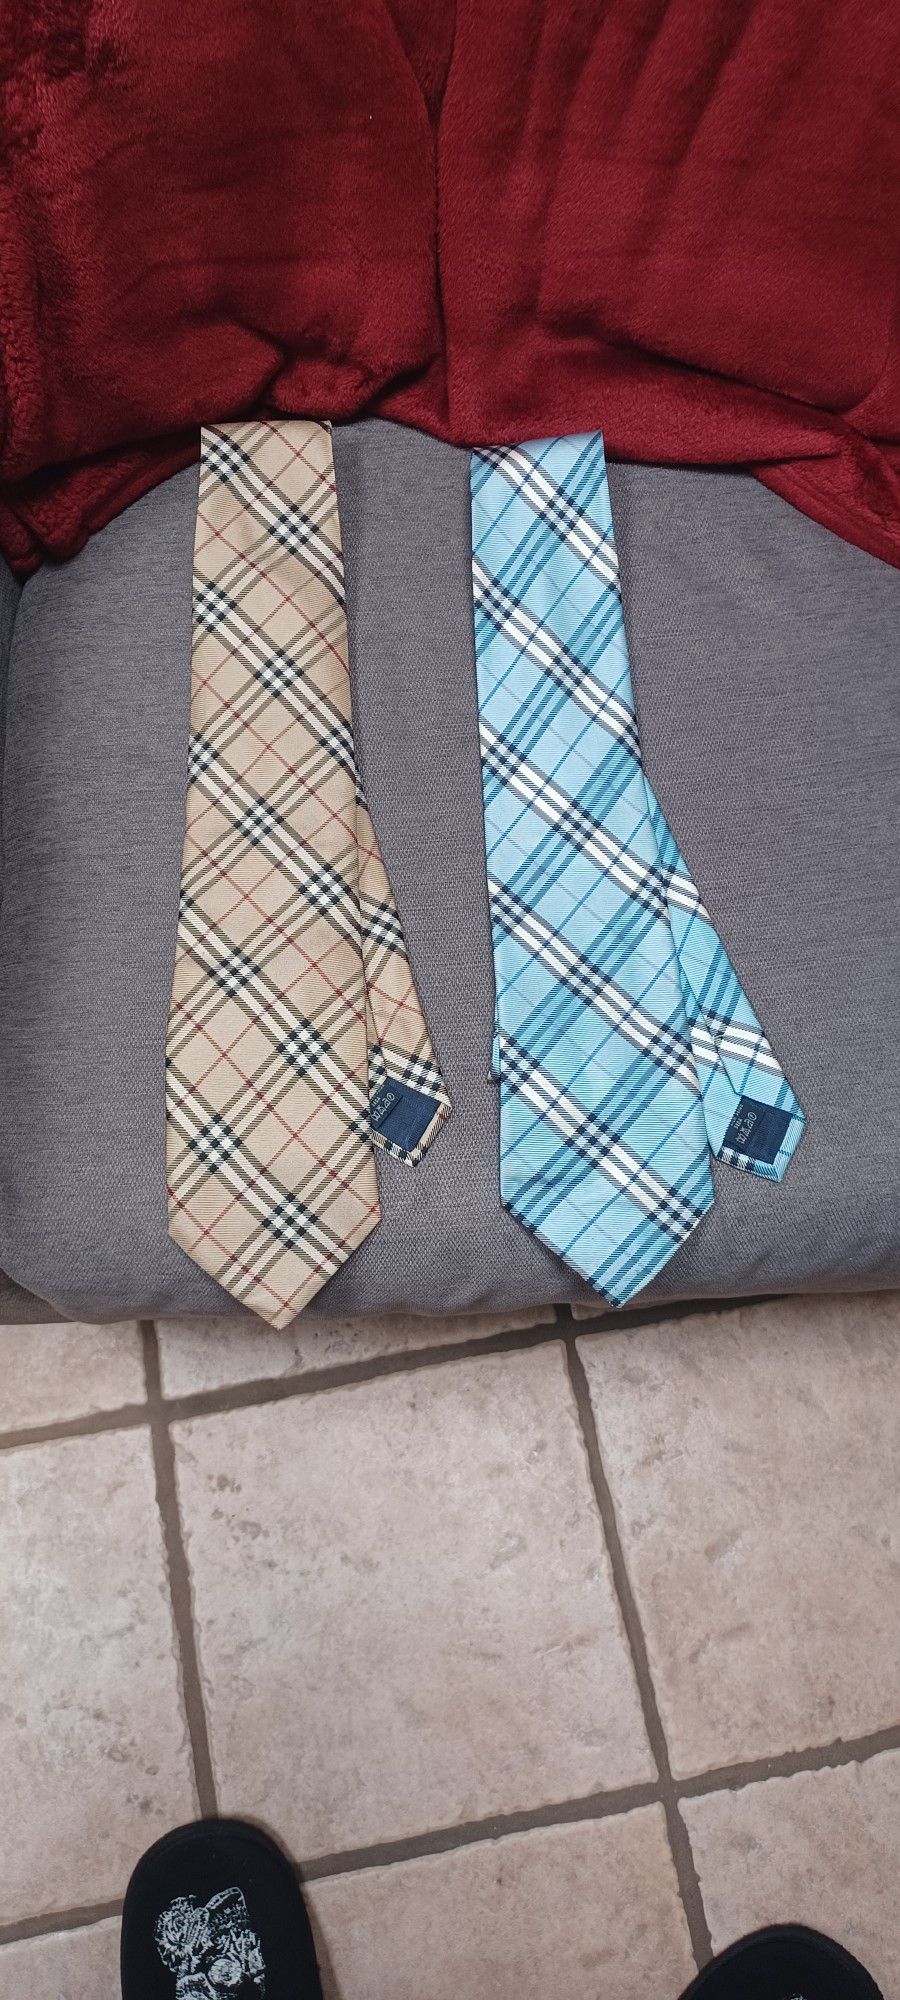 Authentic Burberry Ties - Lightly Used